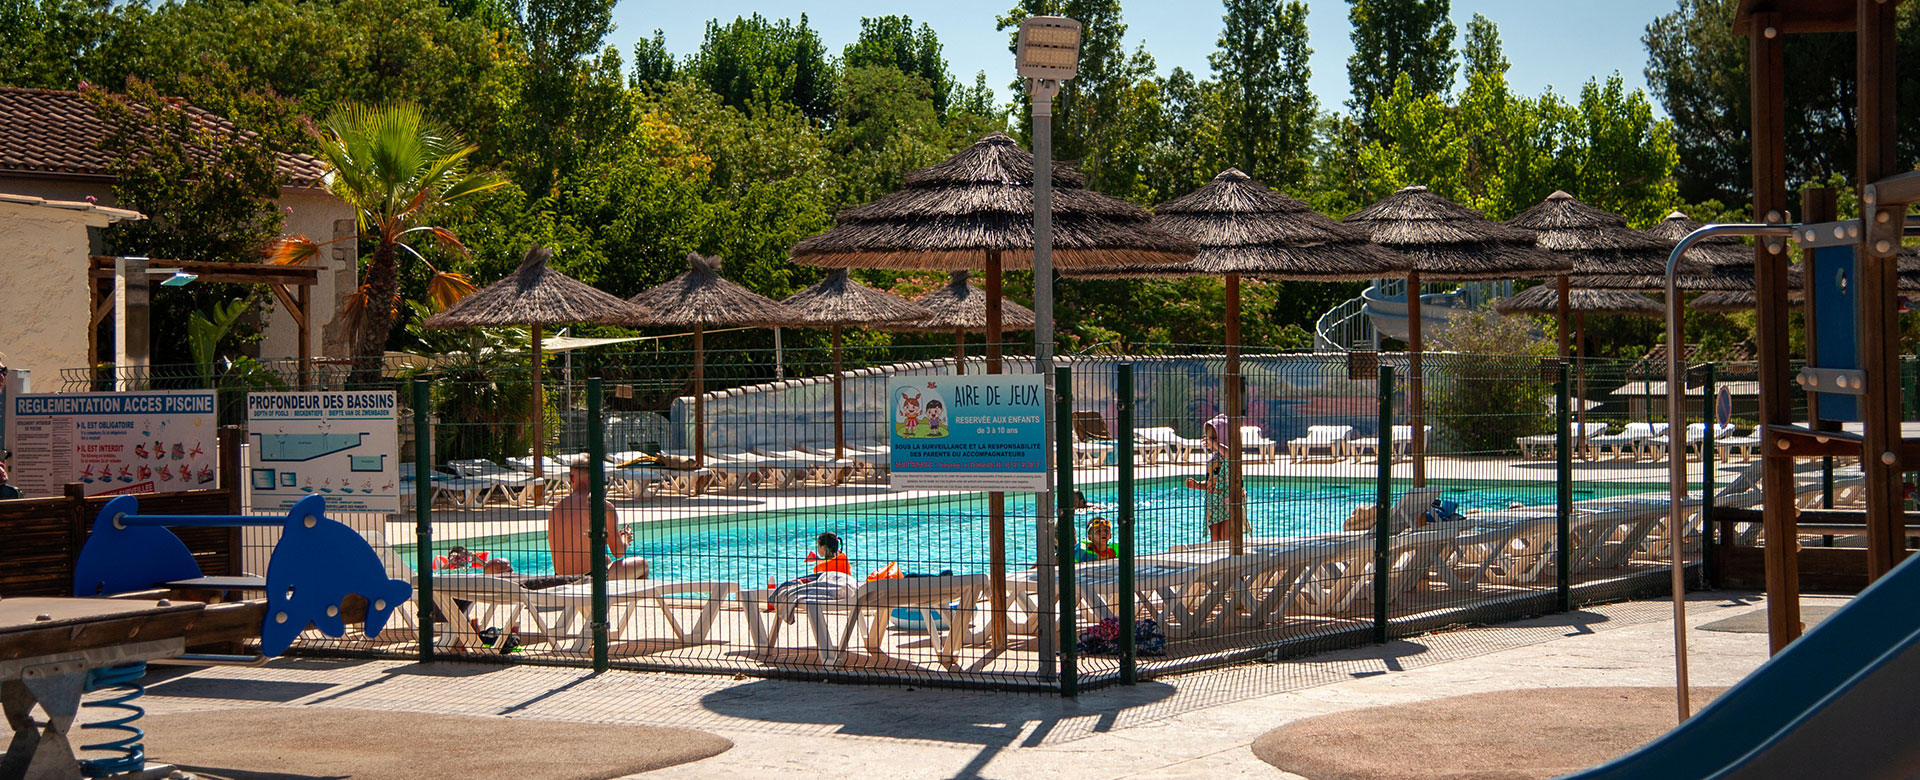 The swimming pool at La Gabinelle campsite near Béziers in Hérault